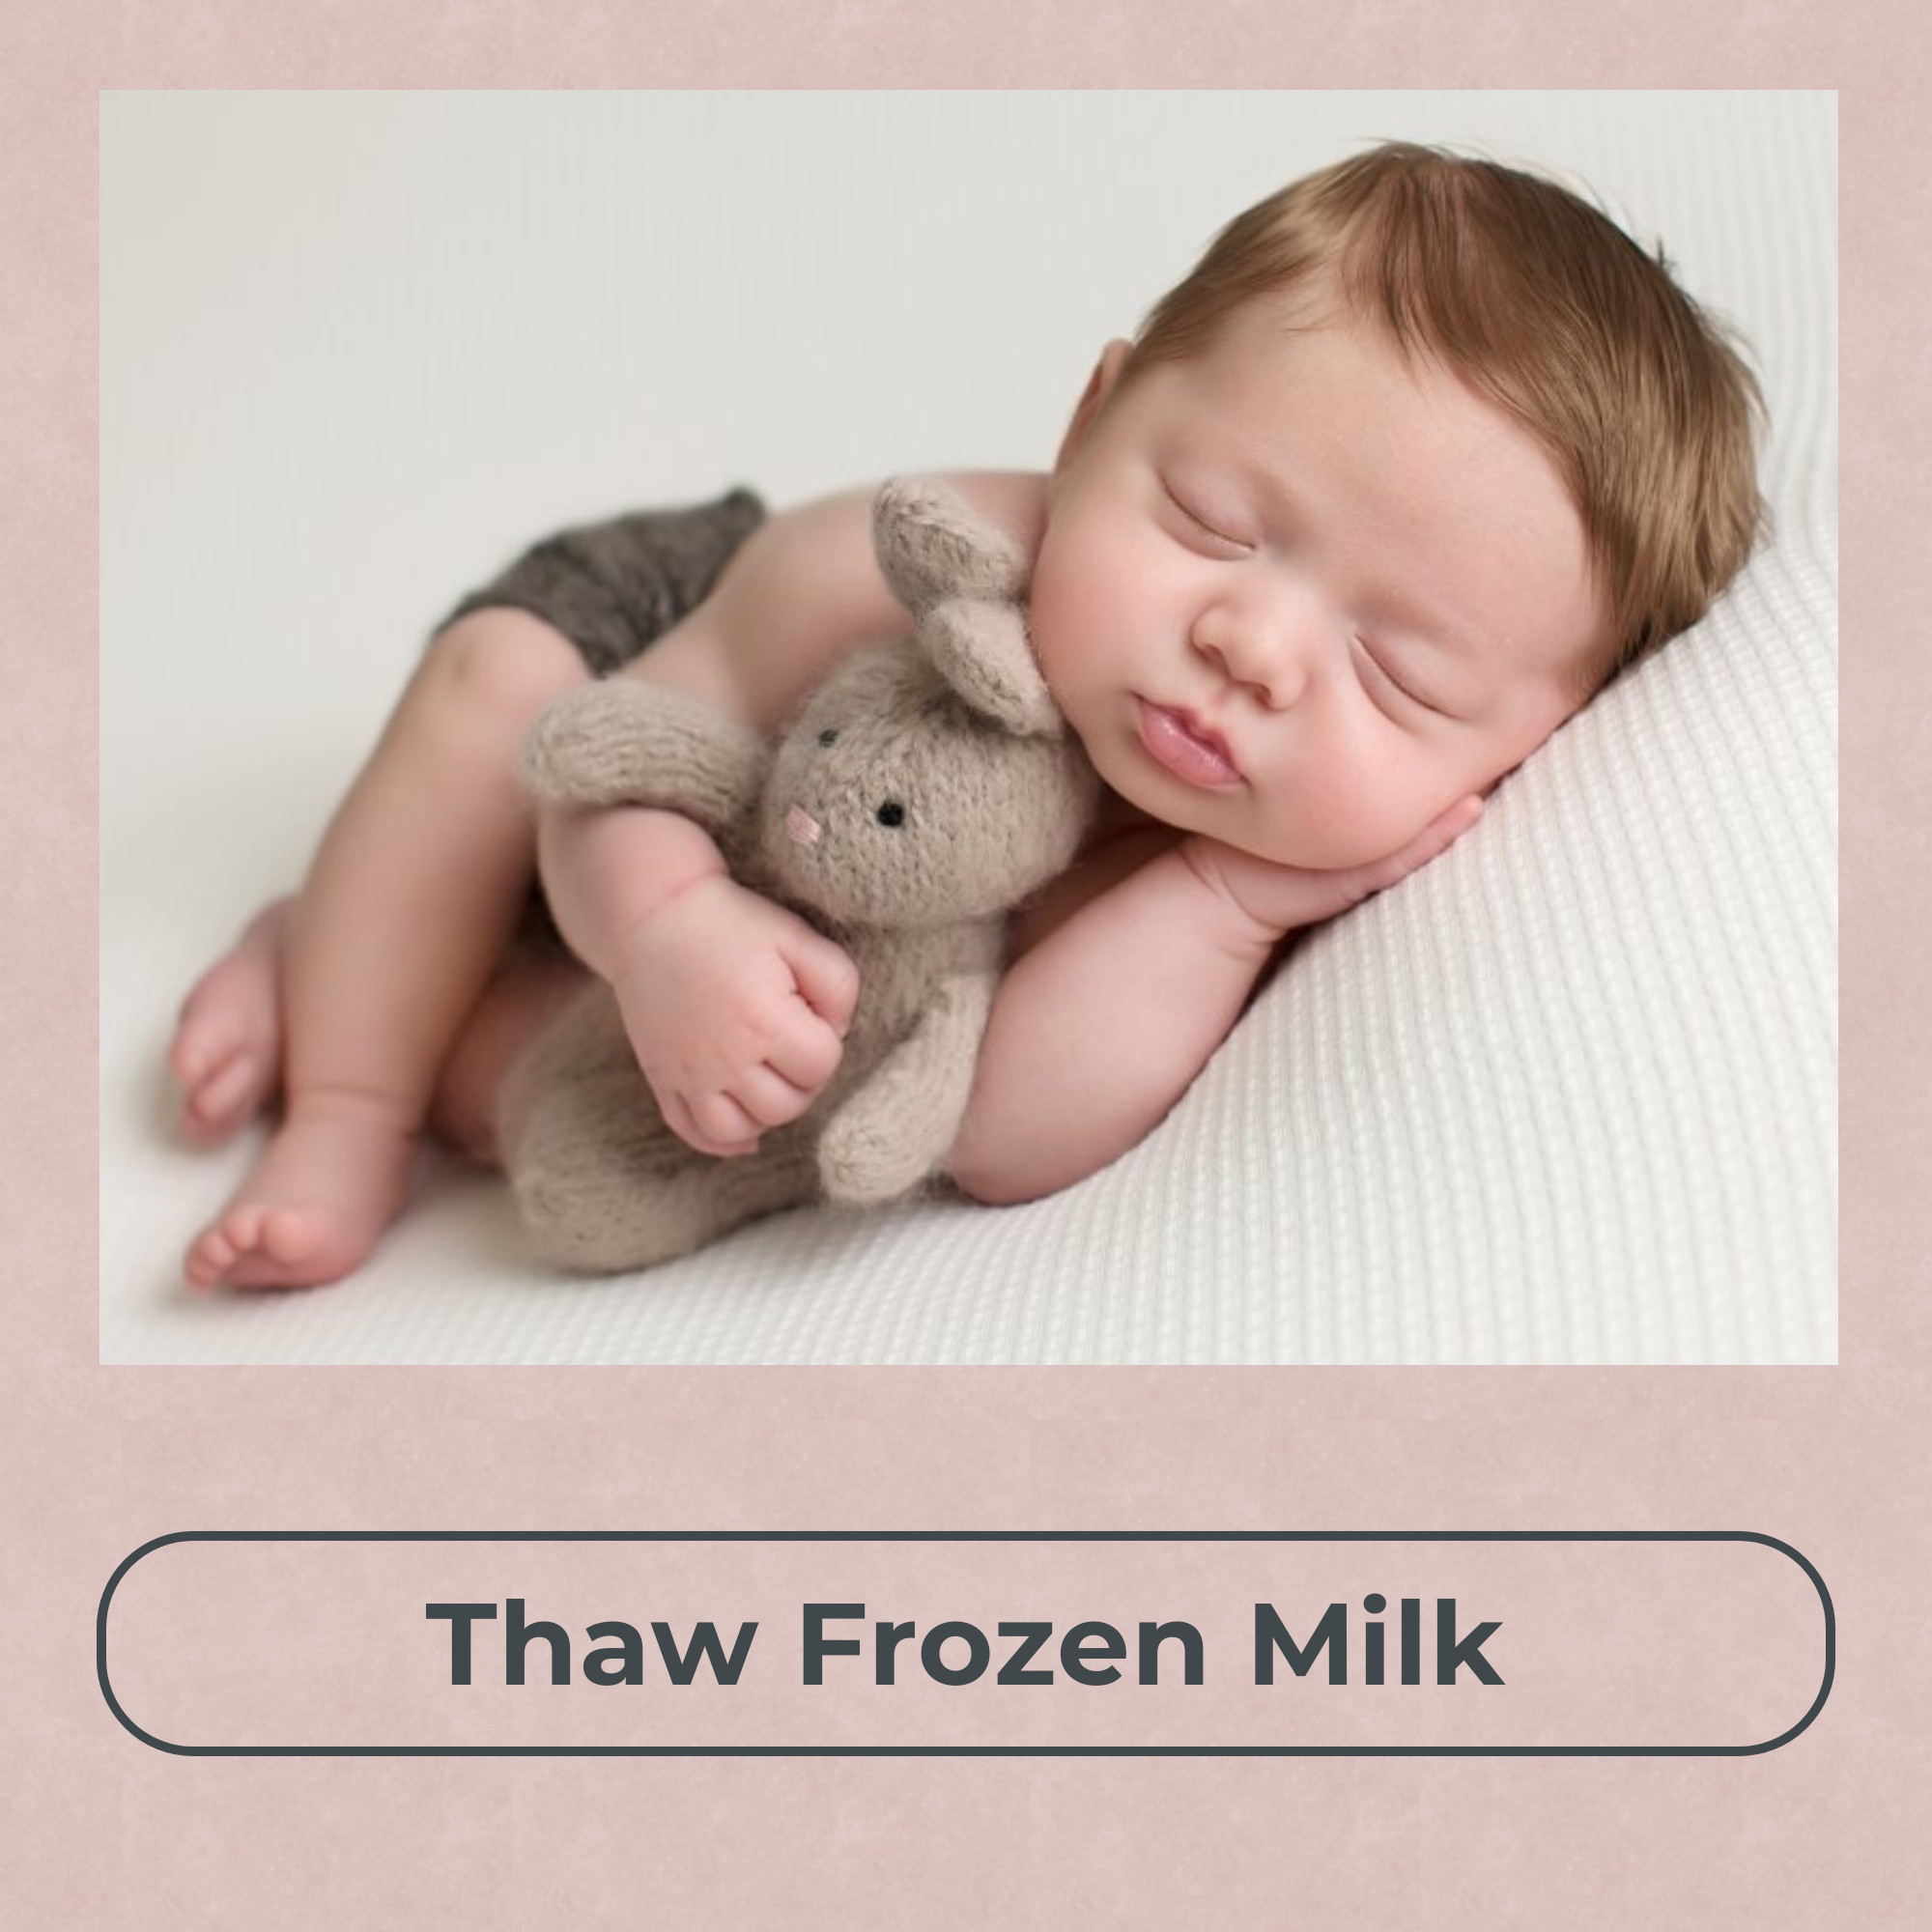 how to thaw frozen breast ilk, how to defrost milk